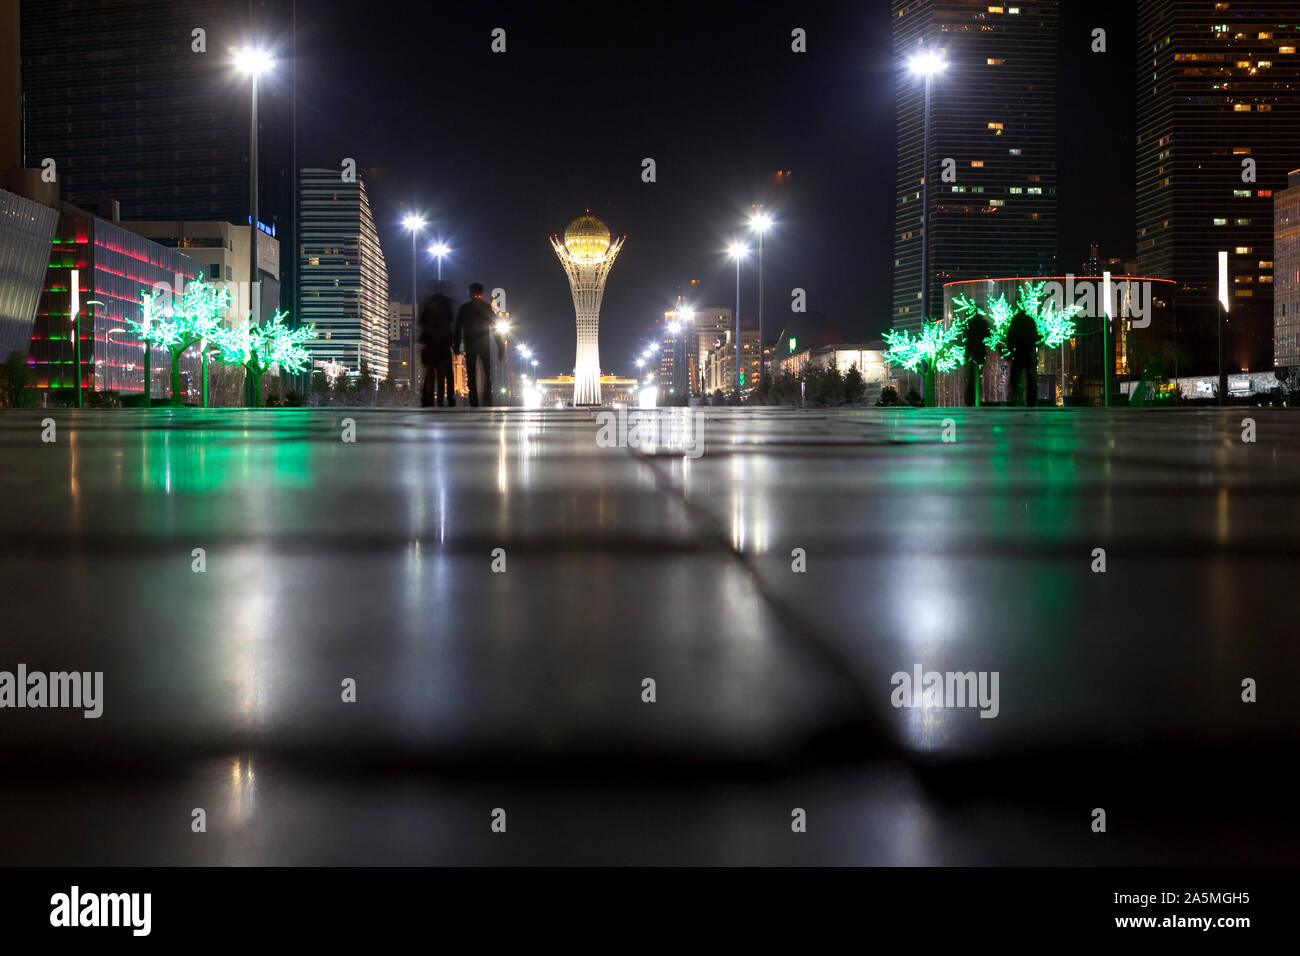 NUR-SULTAN - The Nurzhol Boulevard with the Bayterek tower and plastic trees at night. Stock Photo